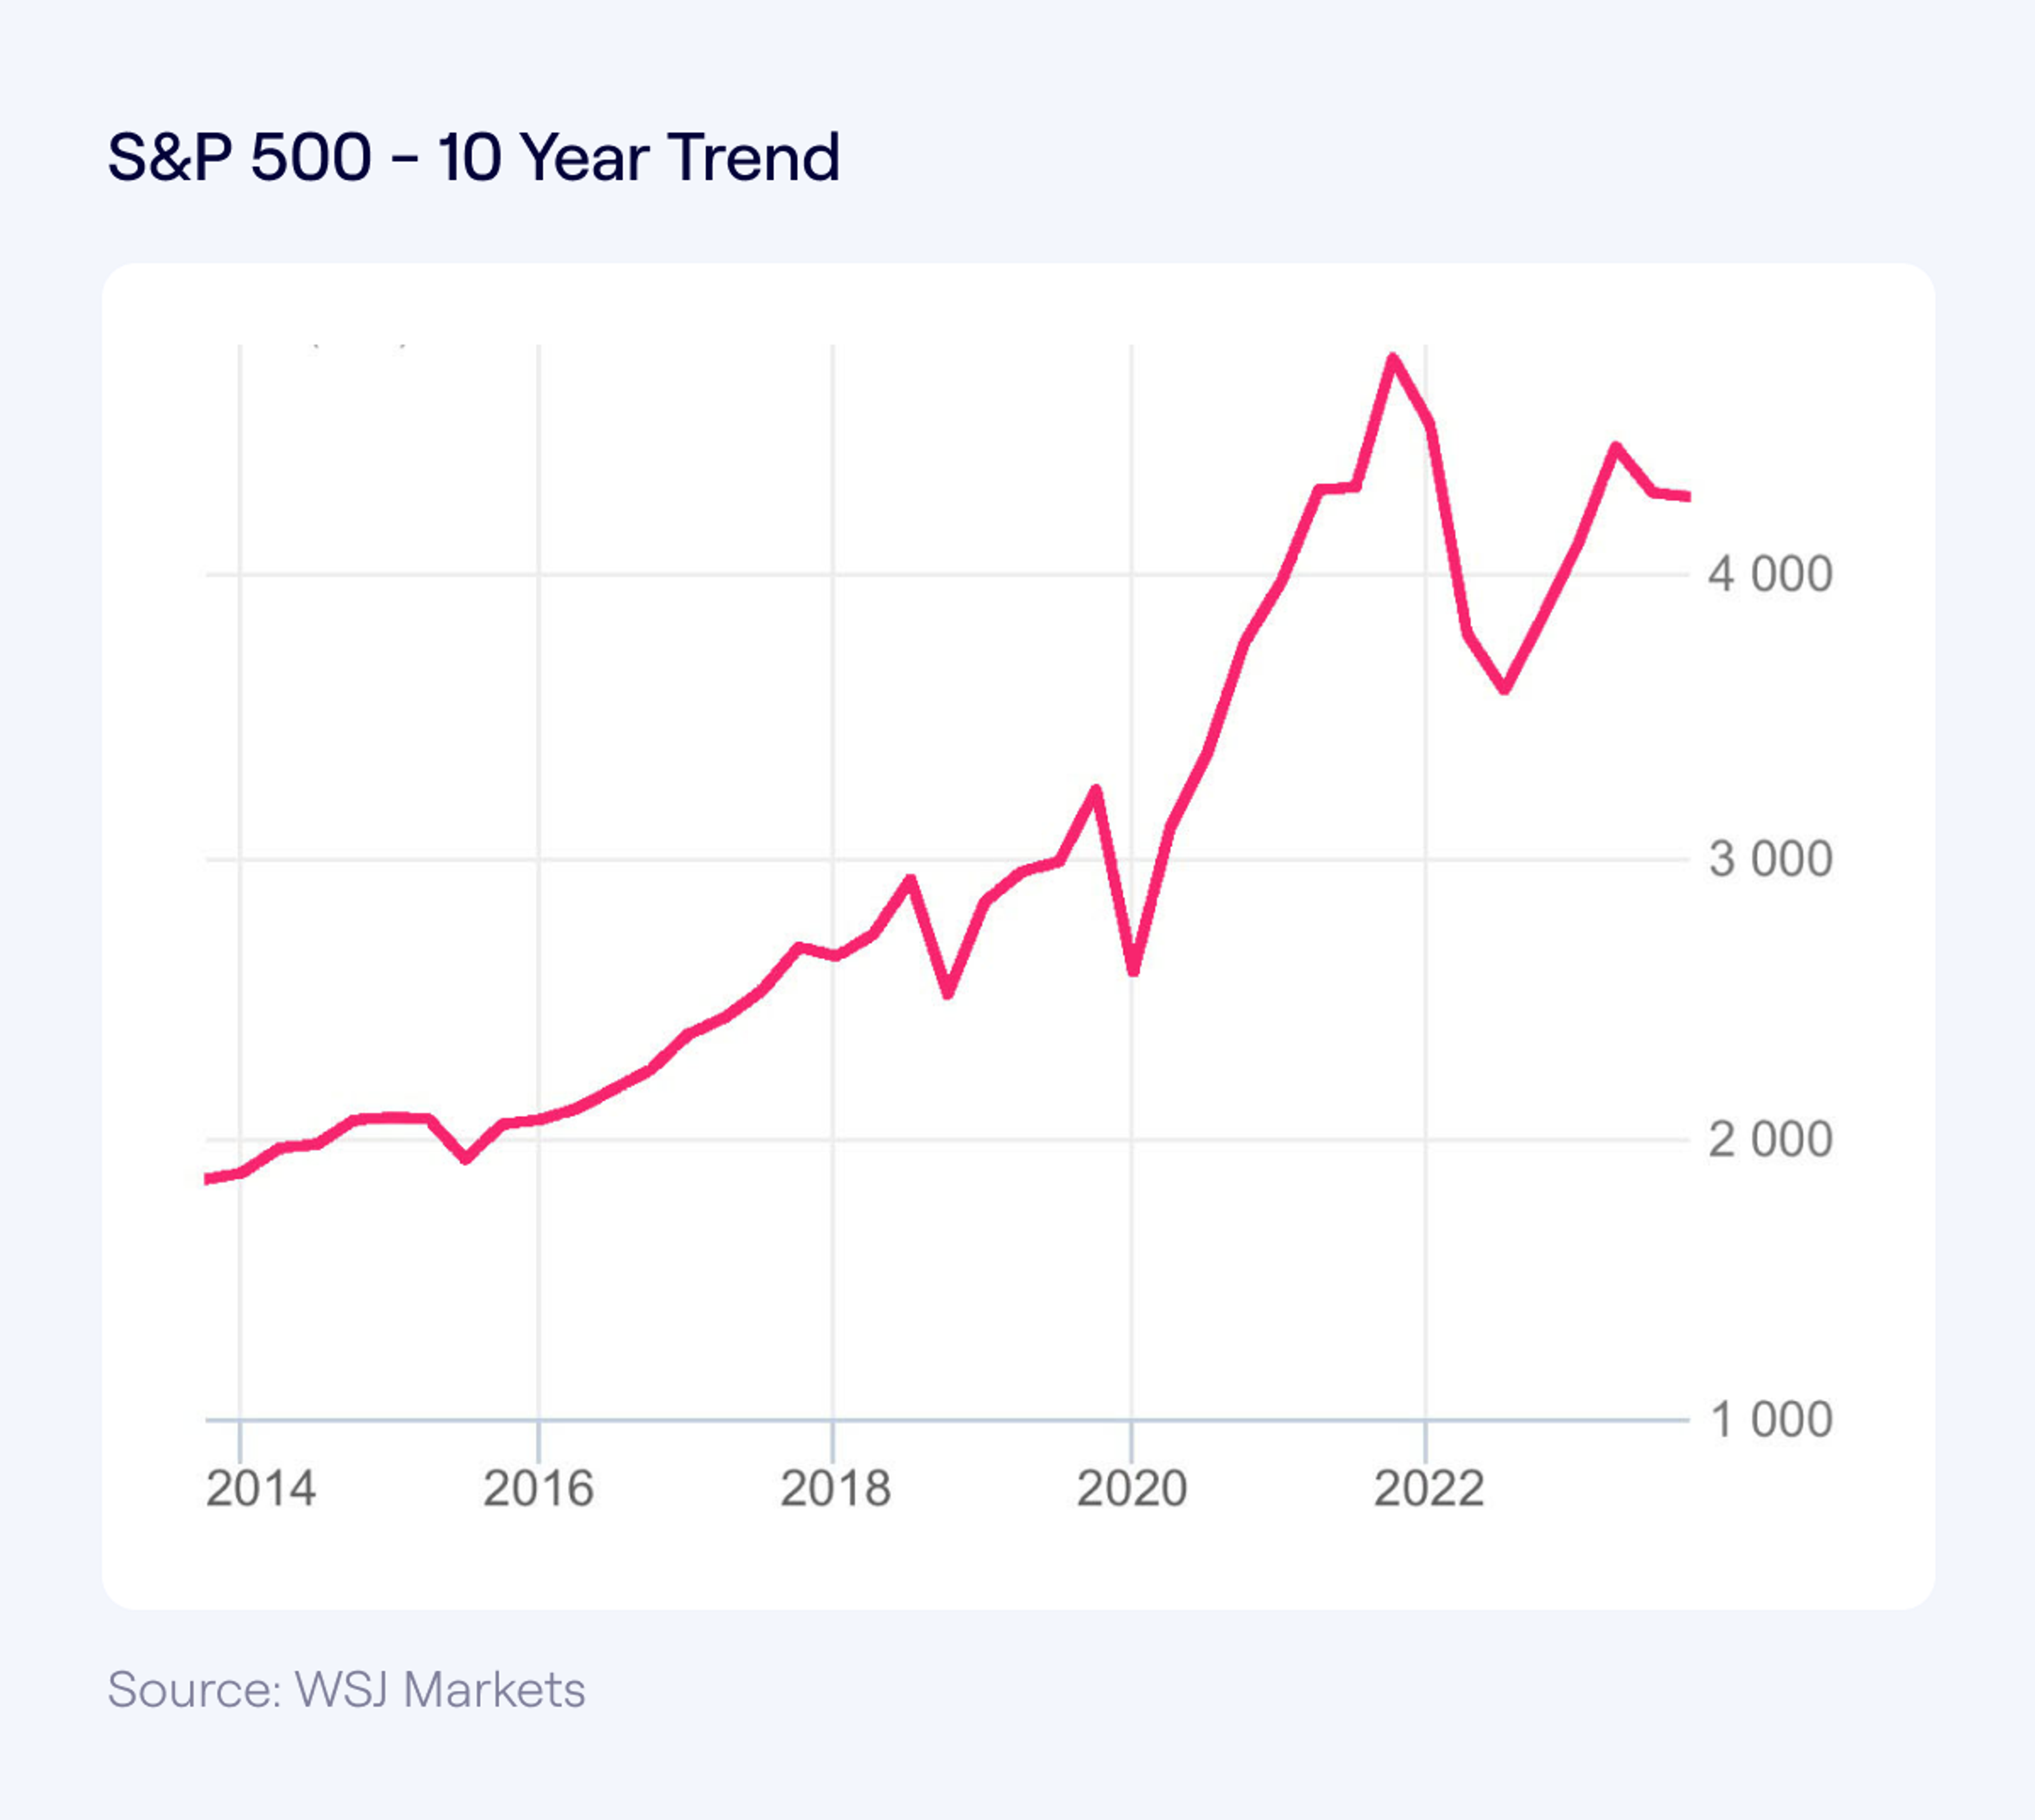 S&P500 10 Year Trend